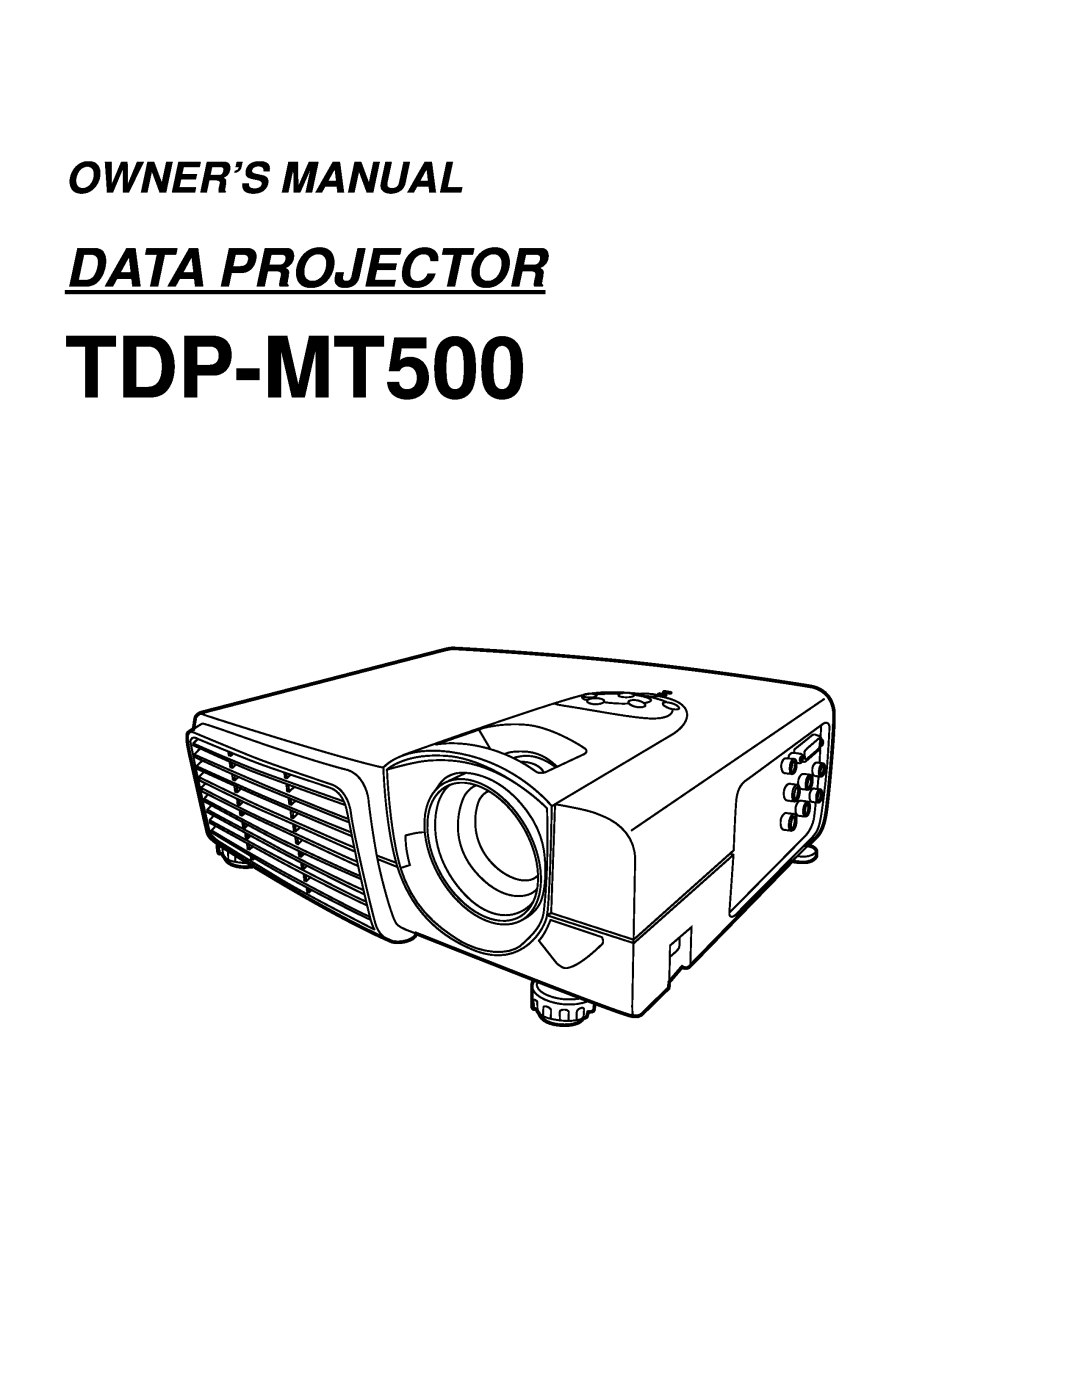 Toshiba TDP-MT500 owner manual Data Projector, Owner’S Manual 